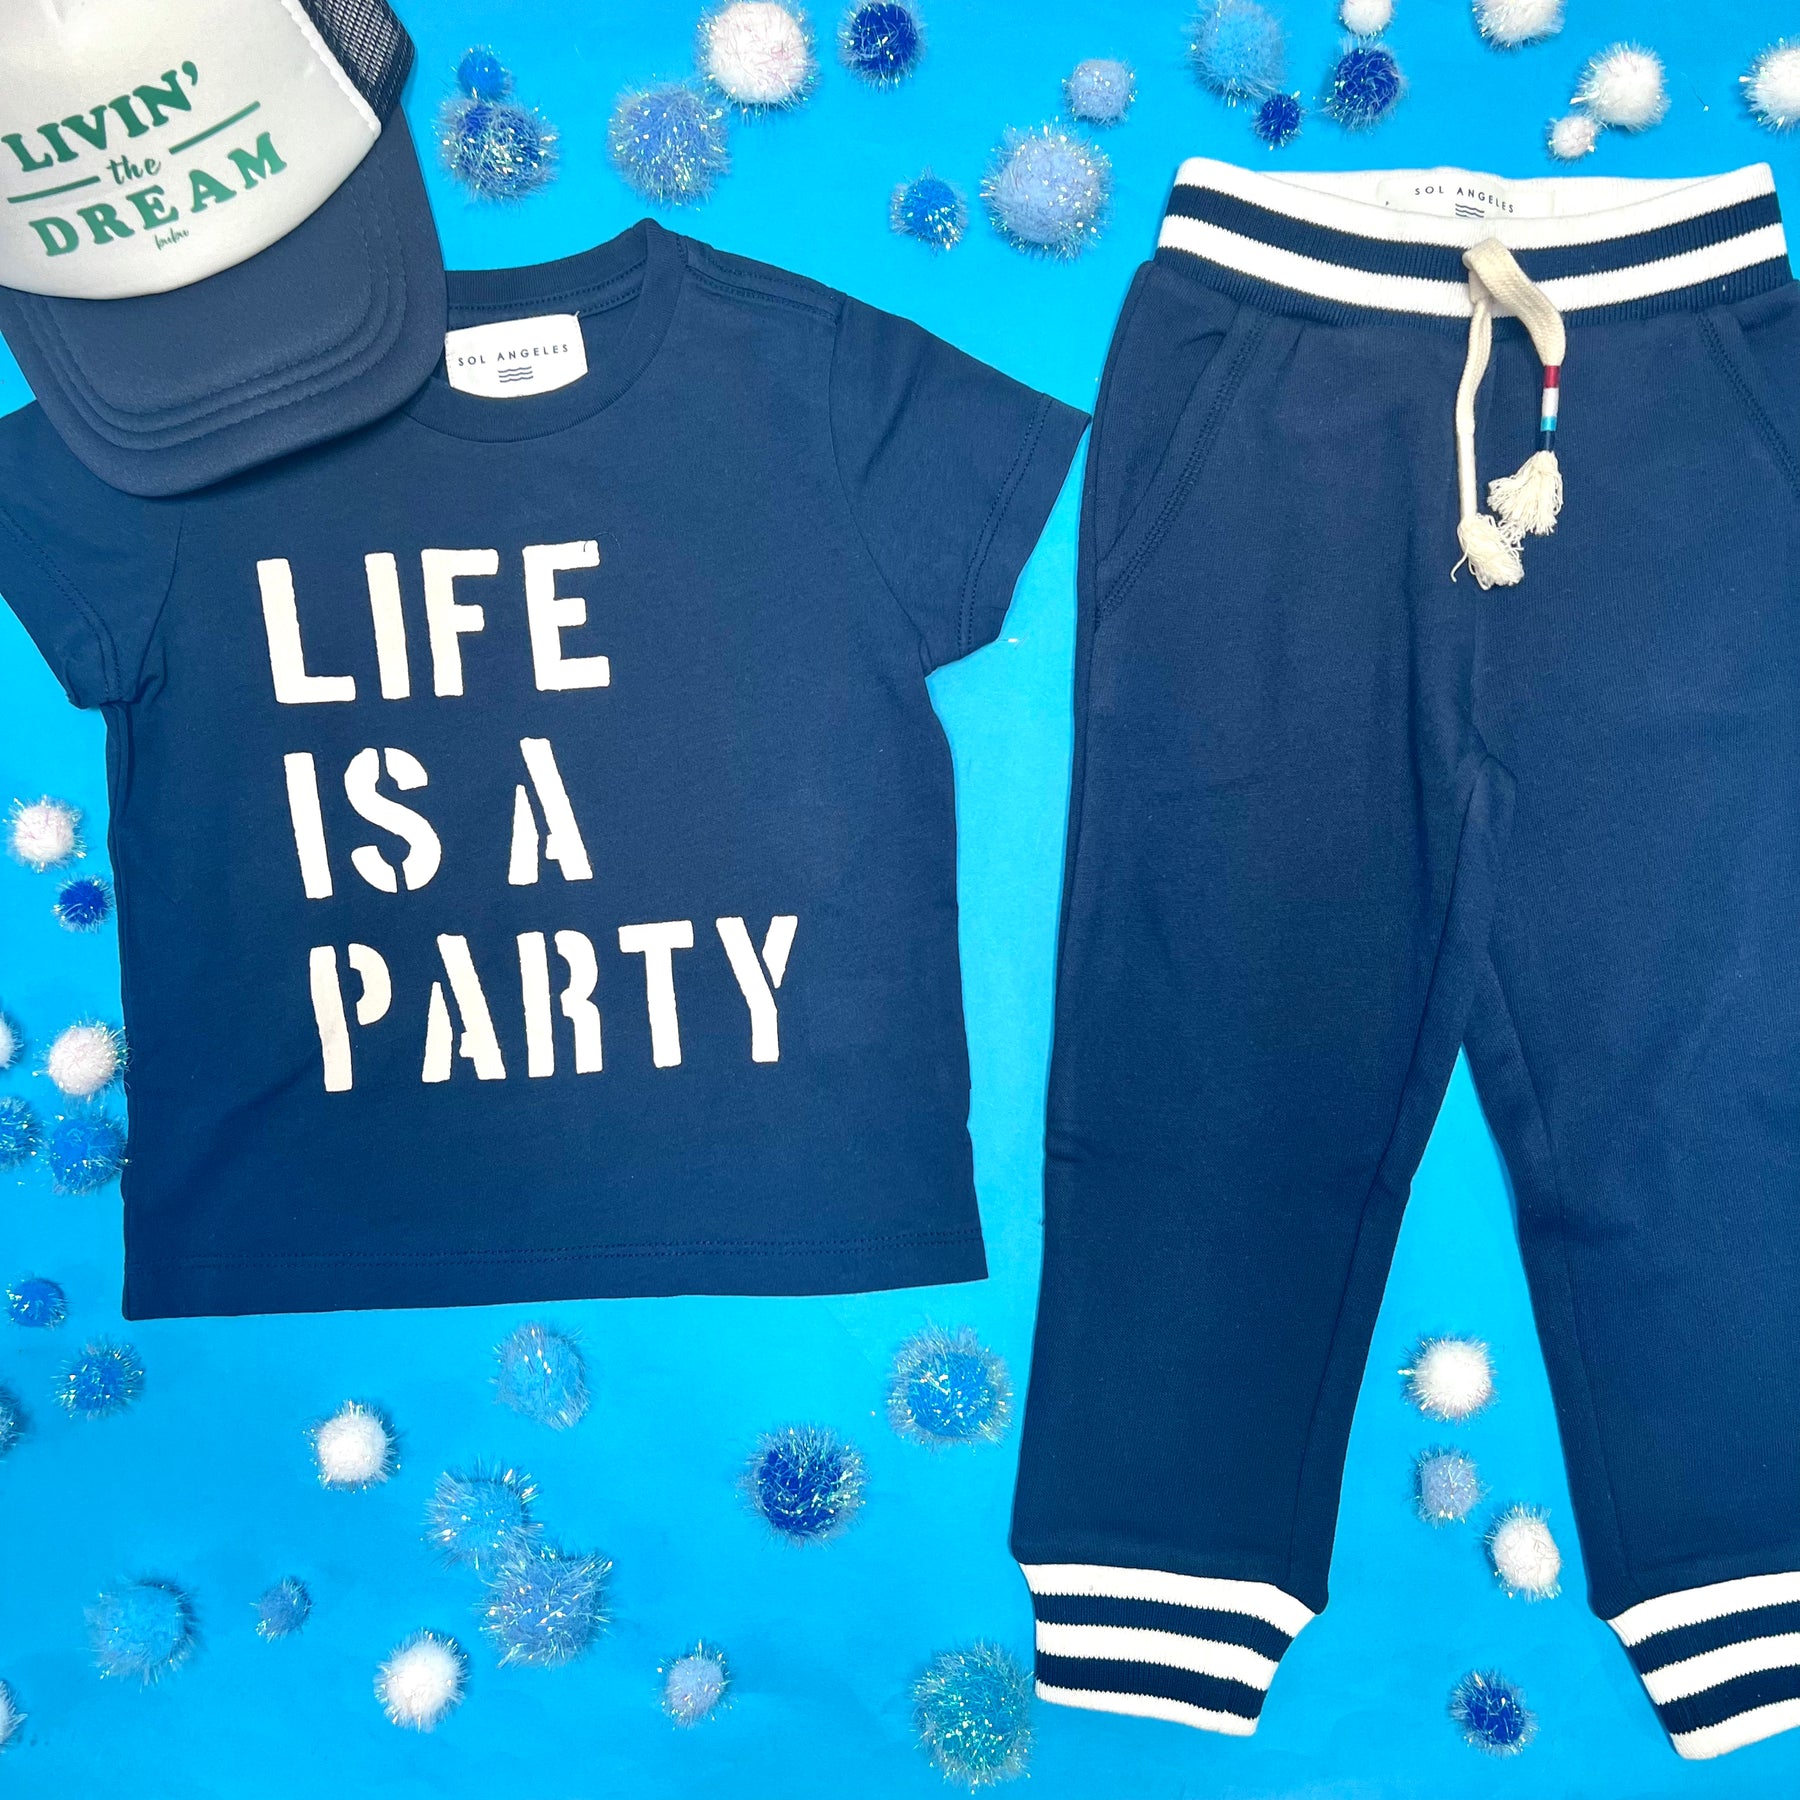 LIFE IS A PARTY TSHIRT